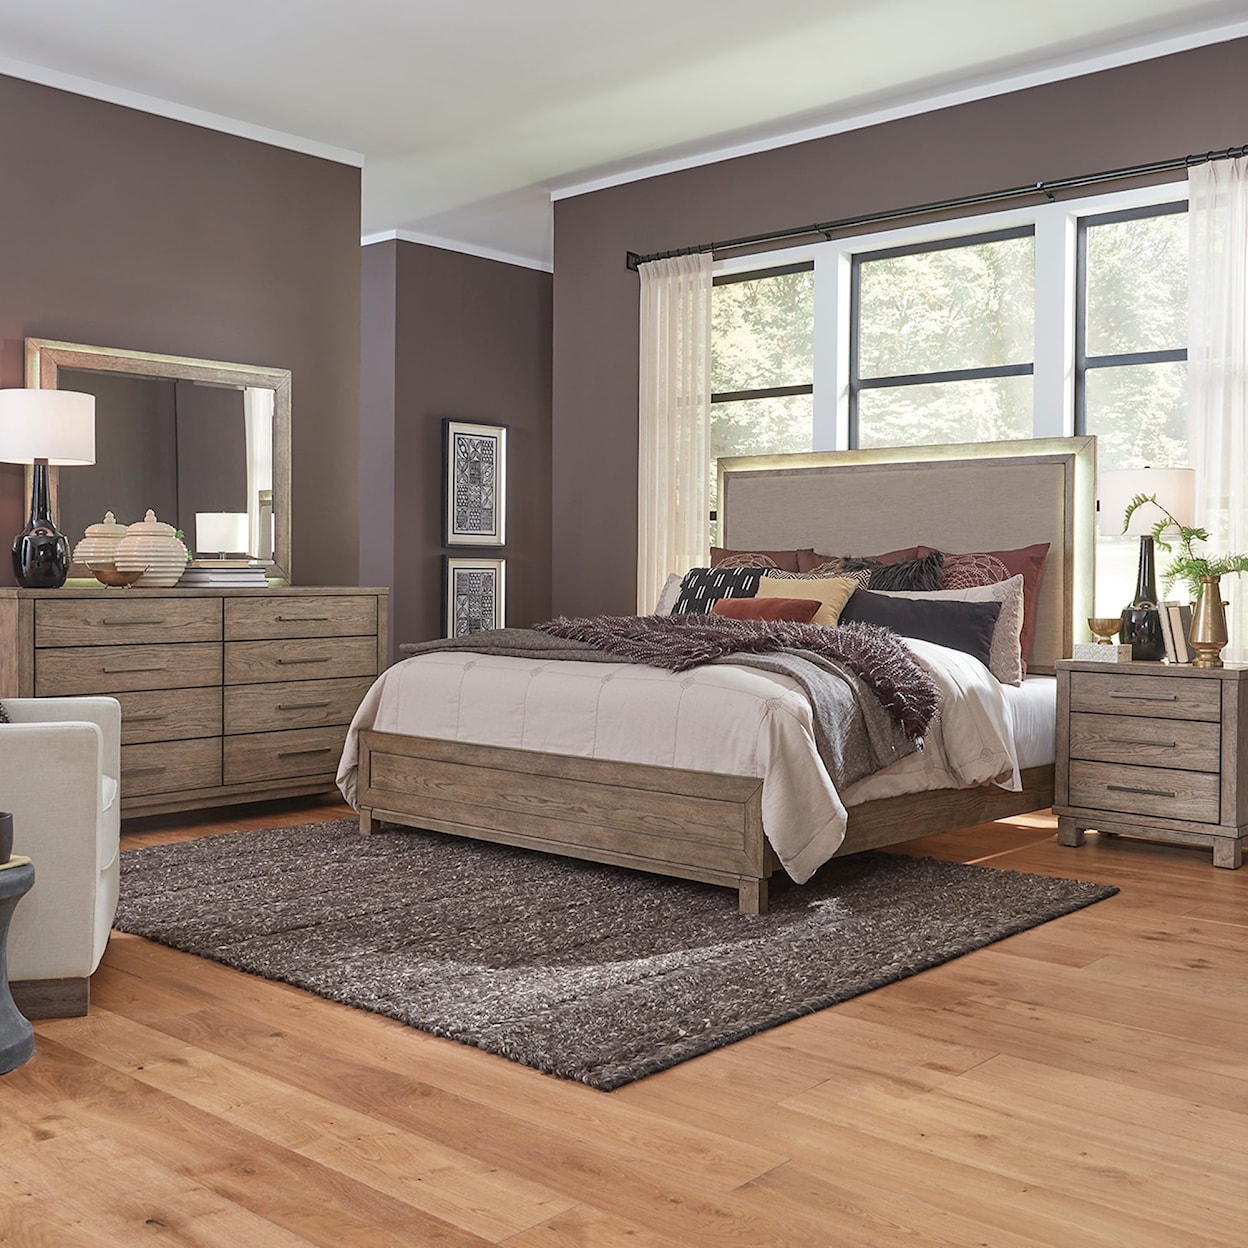 Liberty Furniture Canyon Road Queen Bedroom Group 